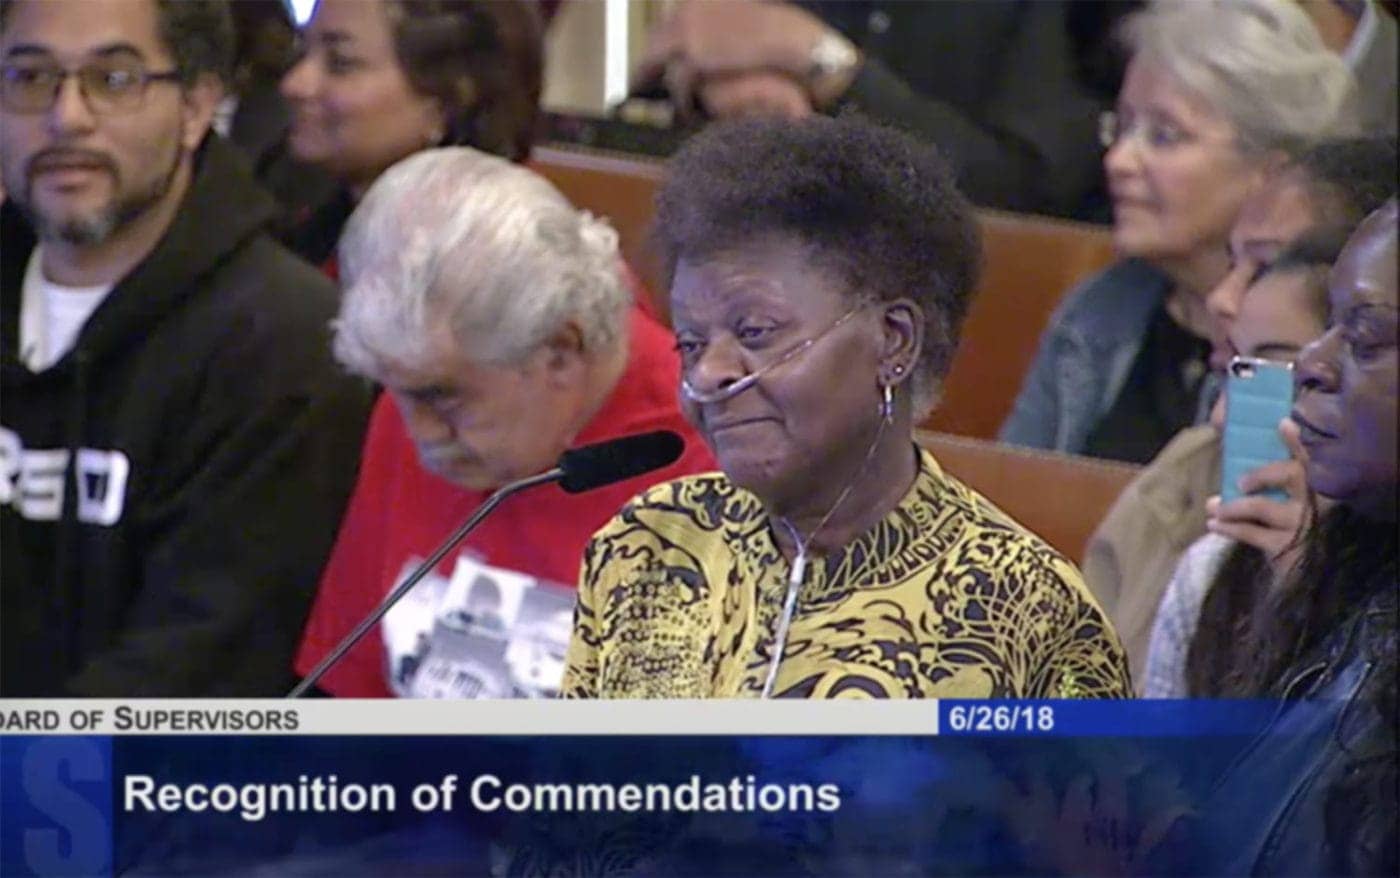 Marie-Harrison-receiving-commendations-from-SF-Board-of-Supervisors-062618-copy-1400x878, Buried! , Local News & Views News & Views 